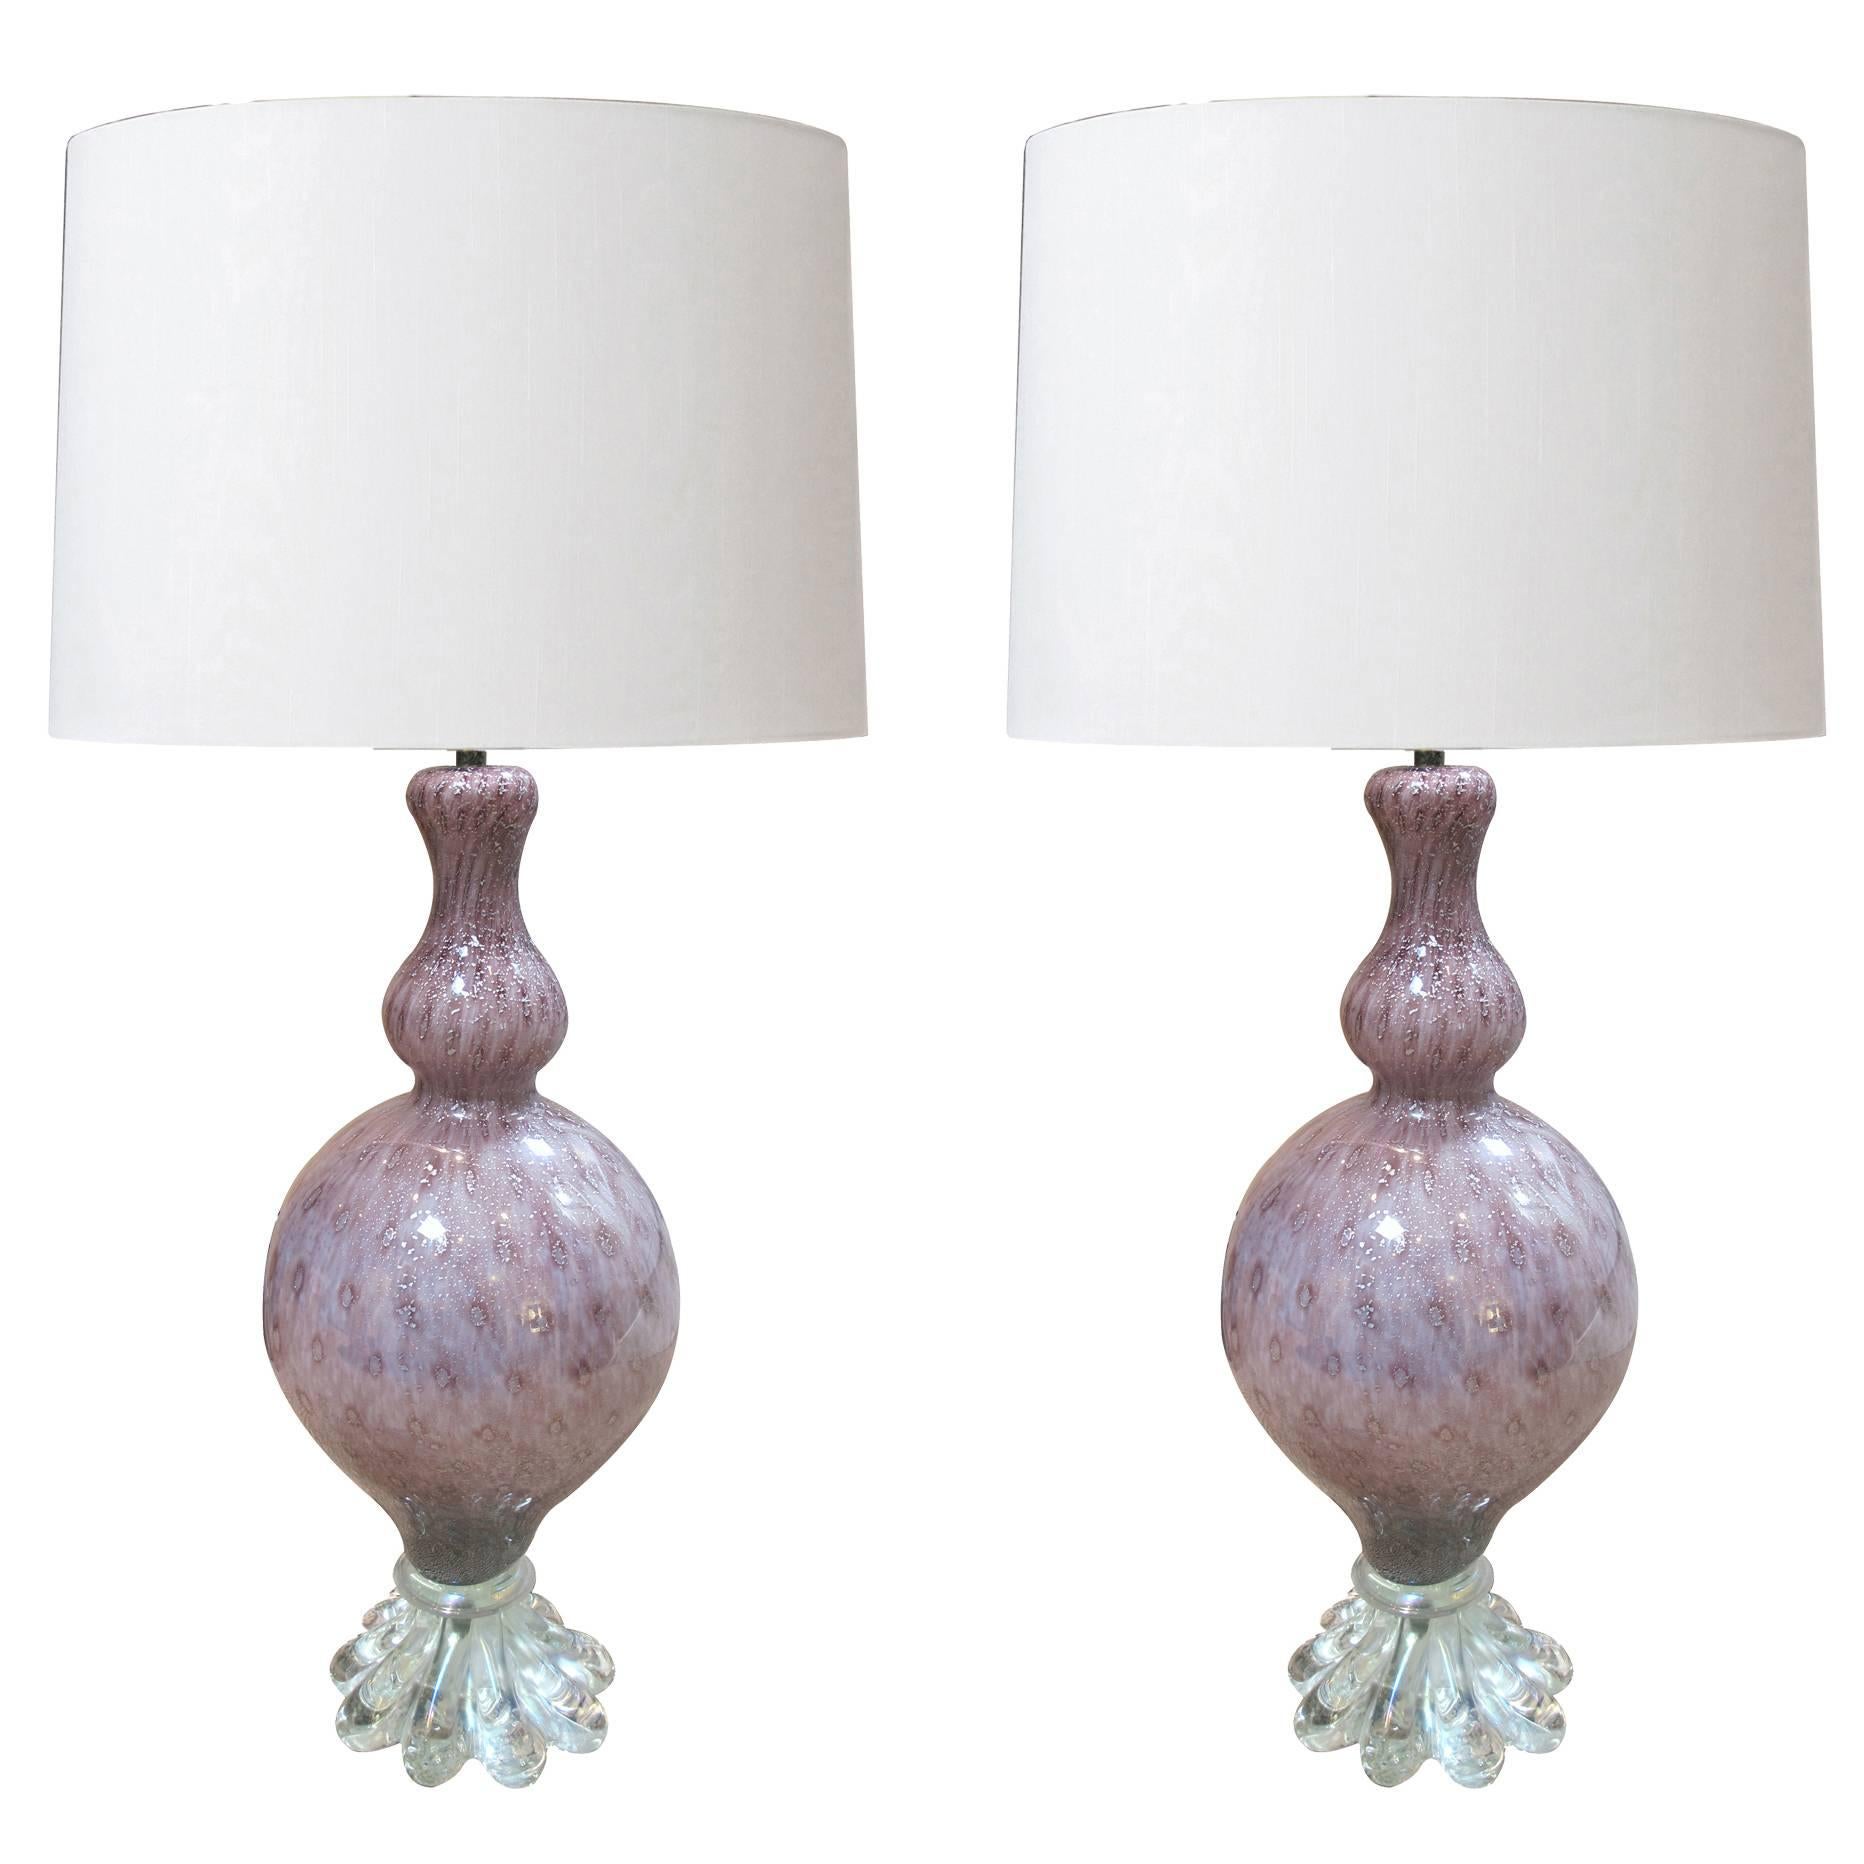 A Large Pair of Murano Archimede Seguso Amethyst  Lamps with Silver Inclusions